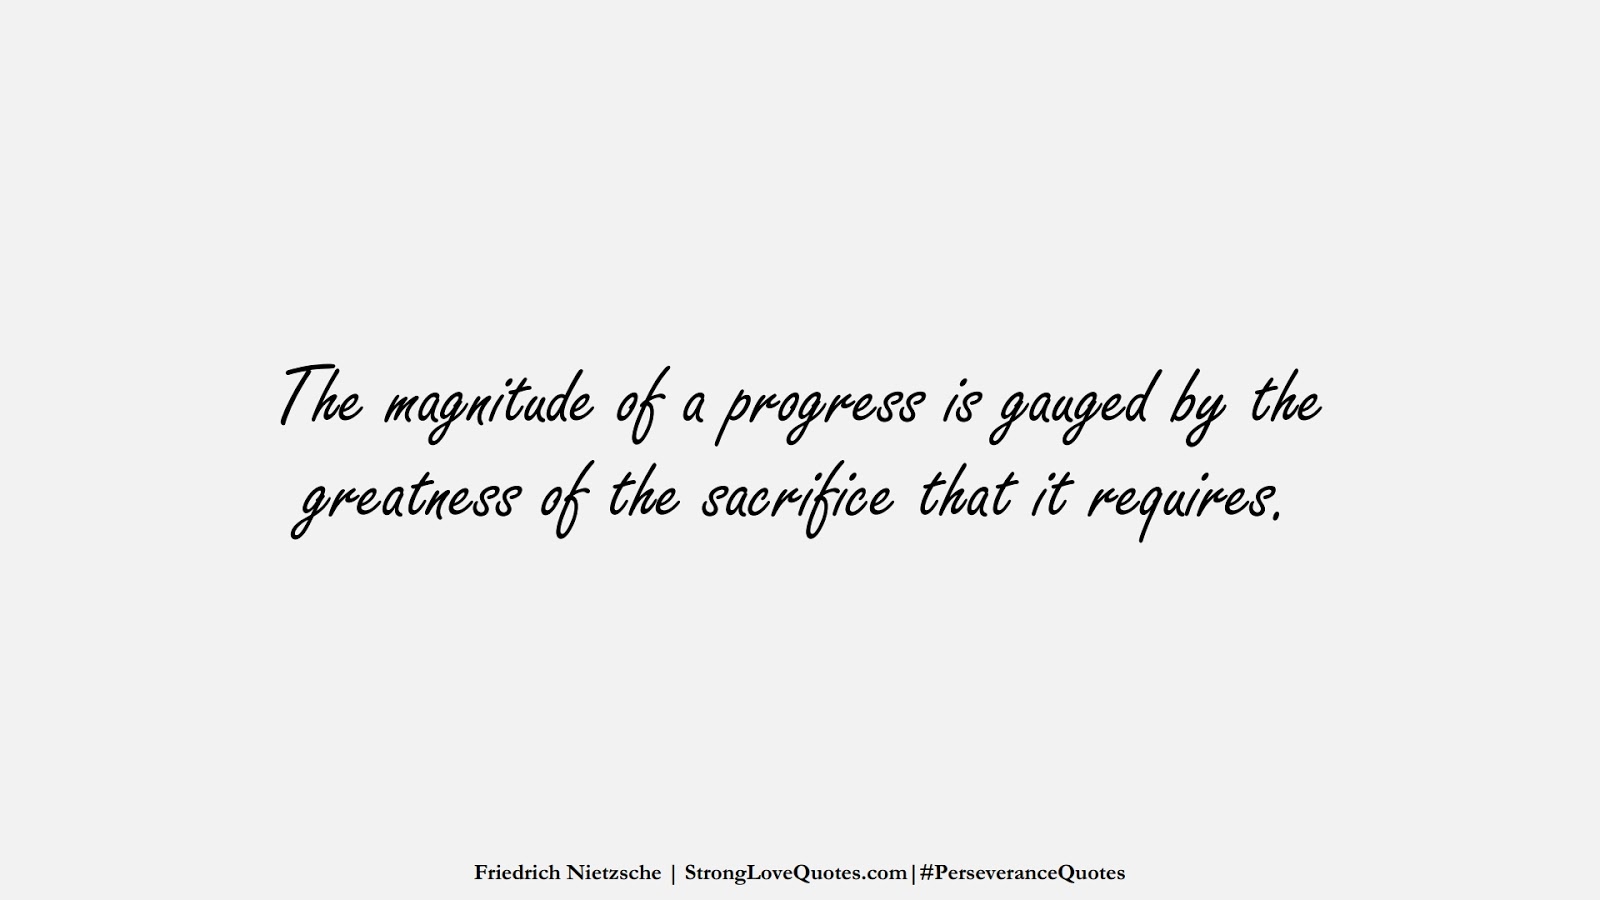 The magnitude of a progress is gauged by the greatness of the sacrifice that it requires. (Friedrich Nietzsche);  #PerseveranceQuotes